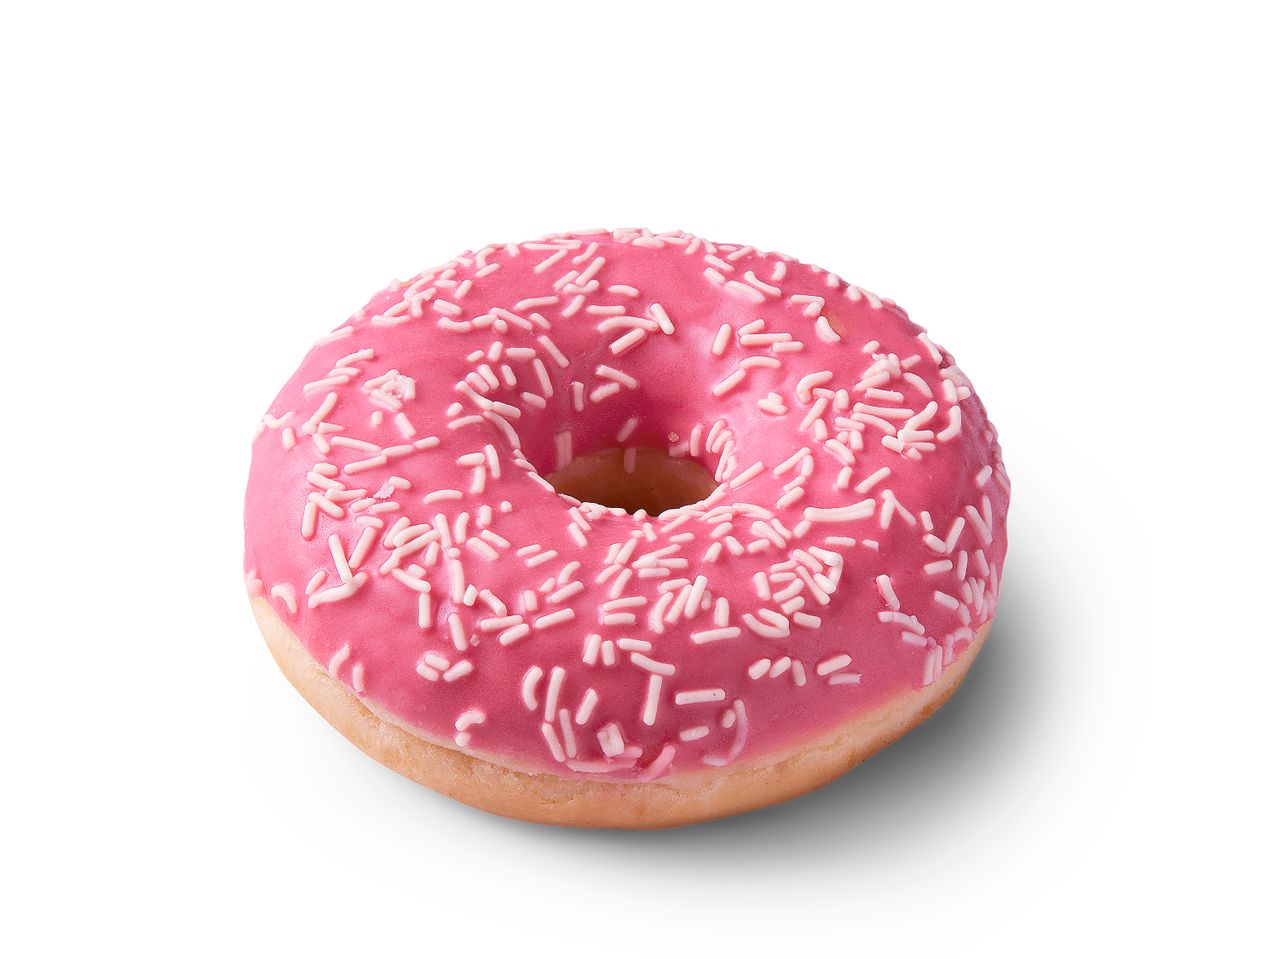 Go to full screen view: Pink Iced Ring Doughnut - Image 1